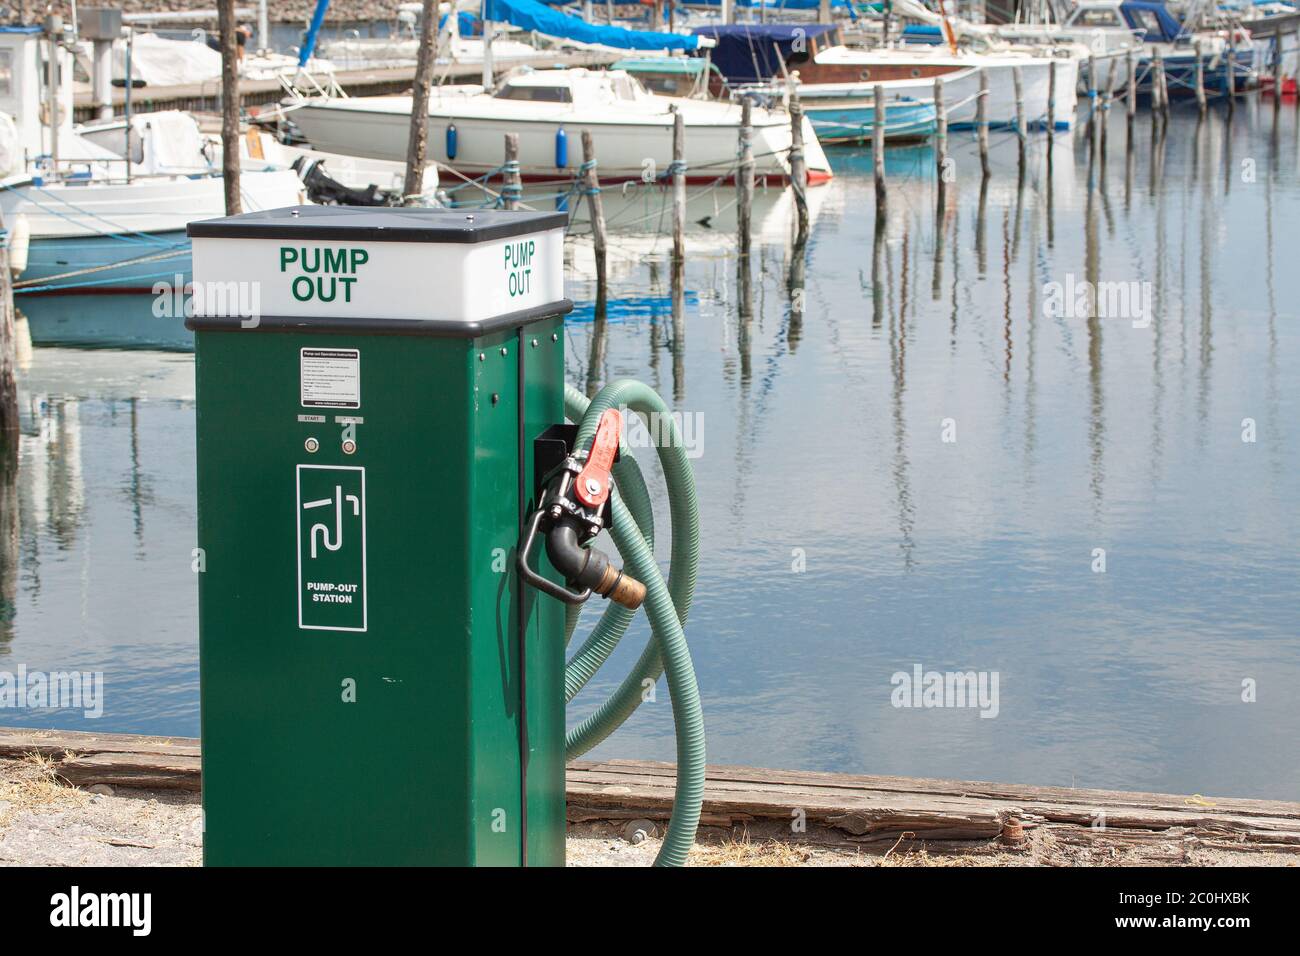 Sewage Pump High Resolution Stock Photography and Images - Alamy